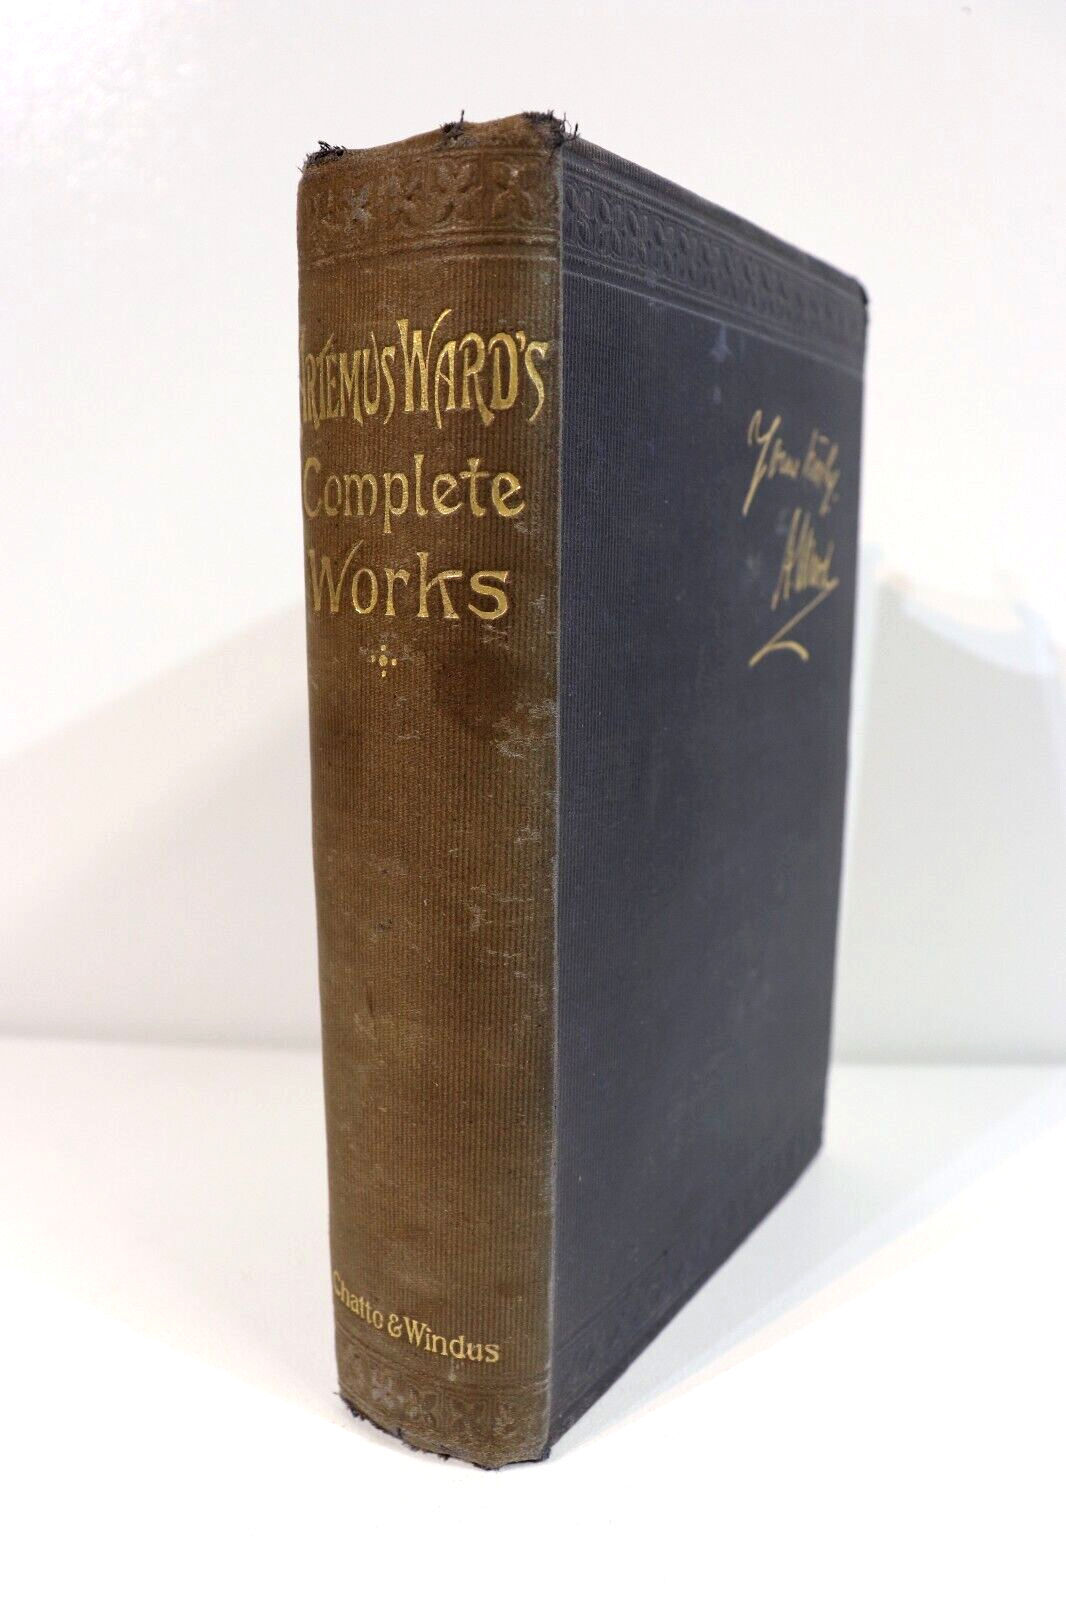 The Complete Works Of Artemus Ward - 1899 - Antique American History Book